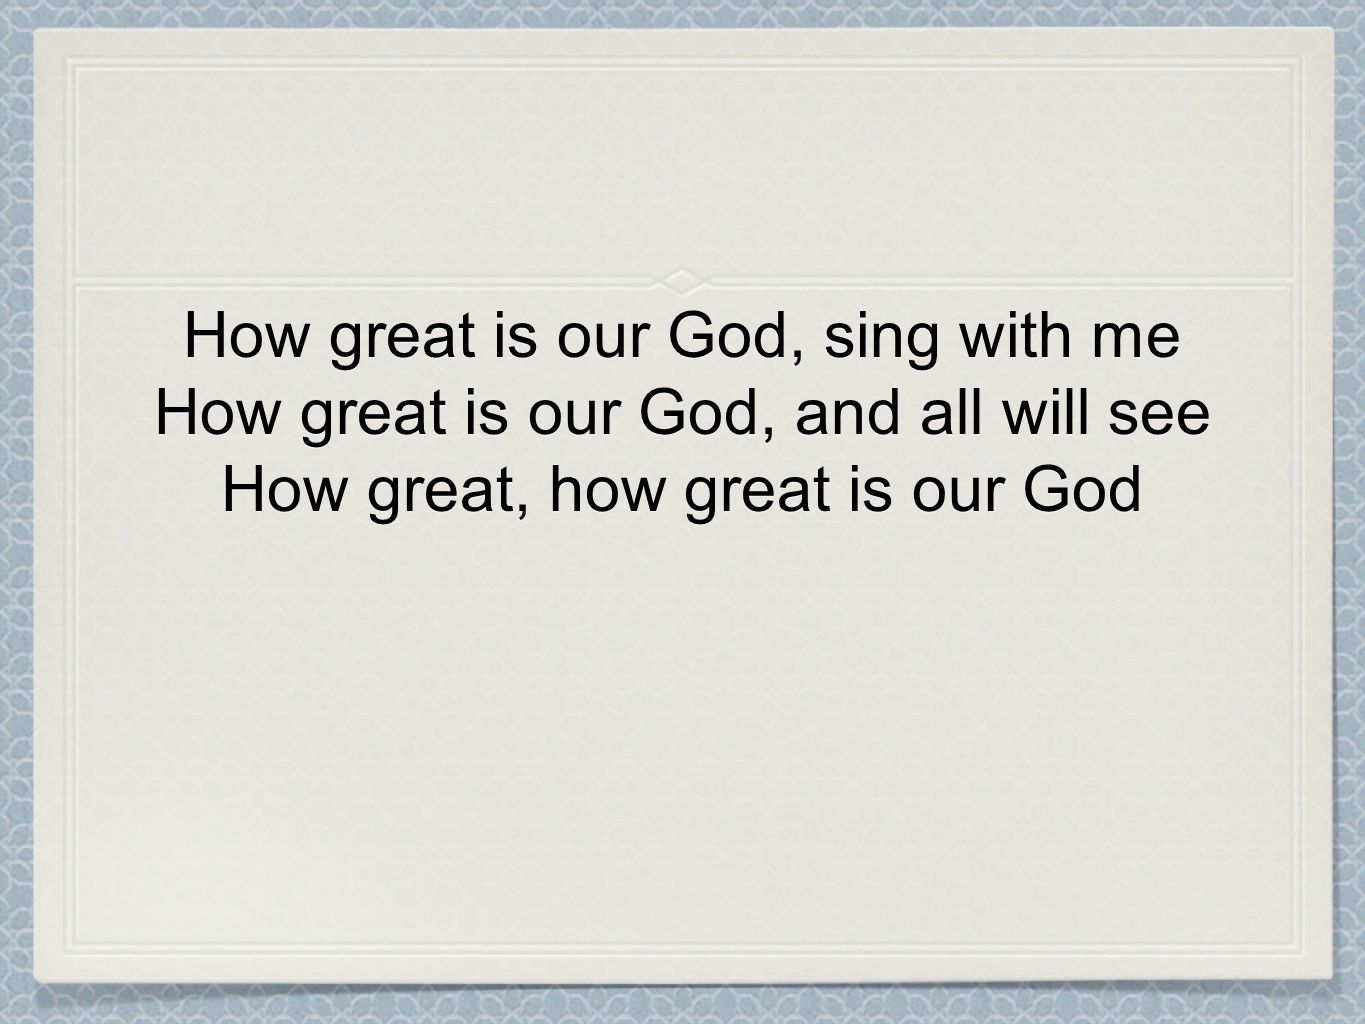 How great is our God, sing with me How great is our God, and all will see How great, how great is our God